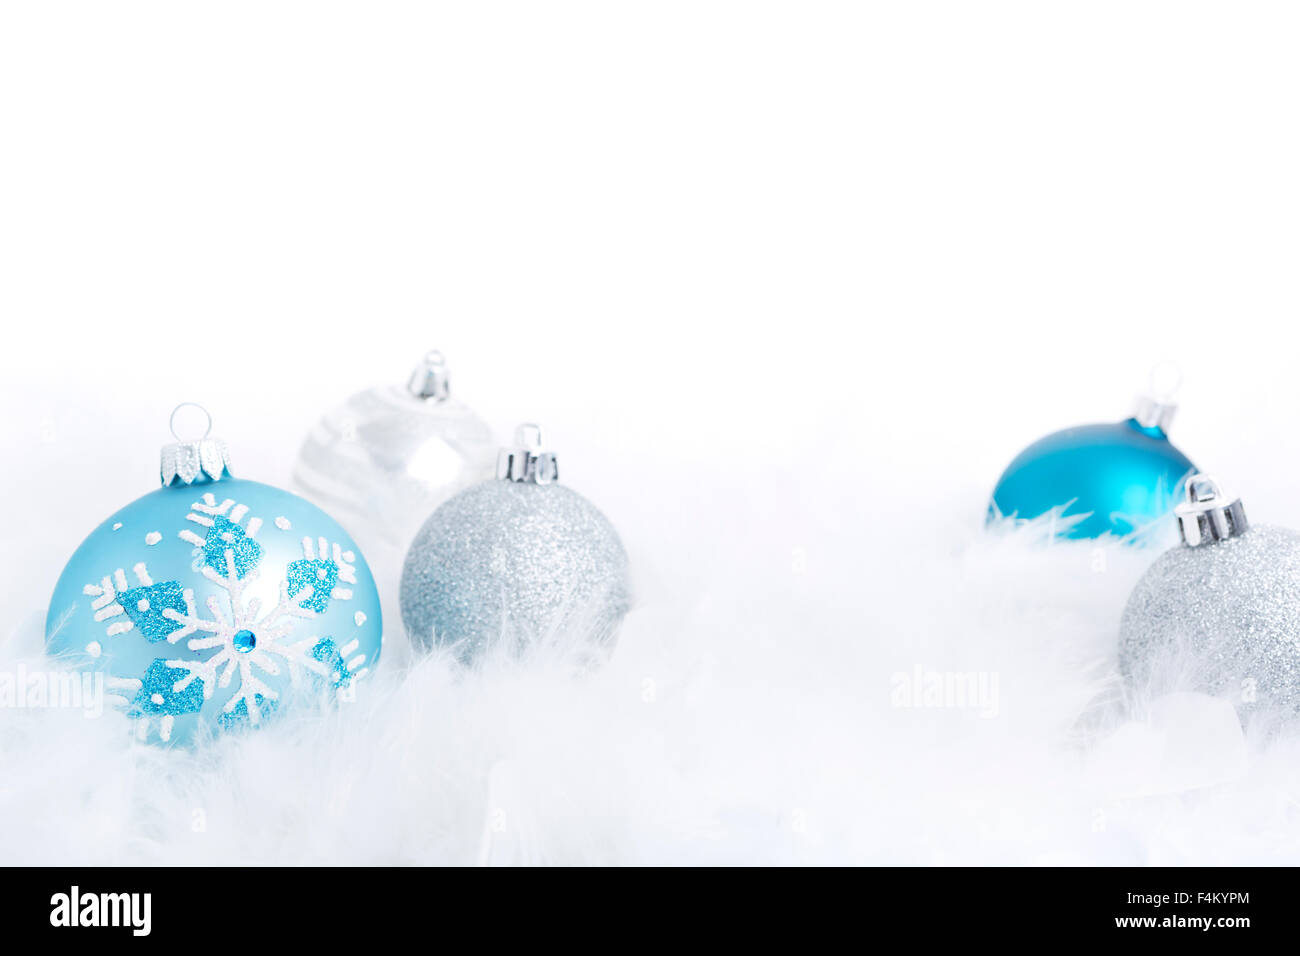 Blue and silver Christmas baubles on a soft feathery surface with a white background. Stock Photo